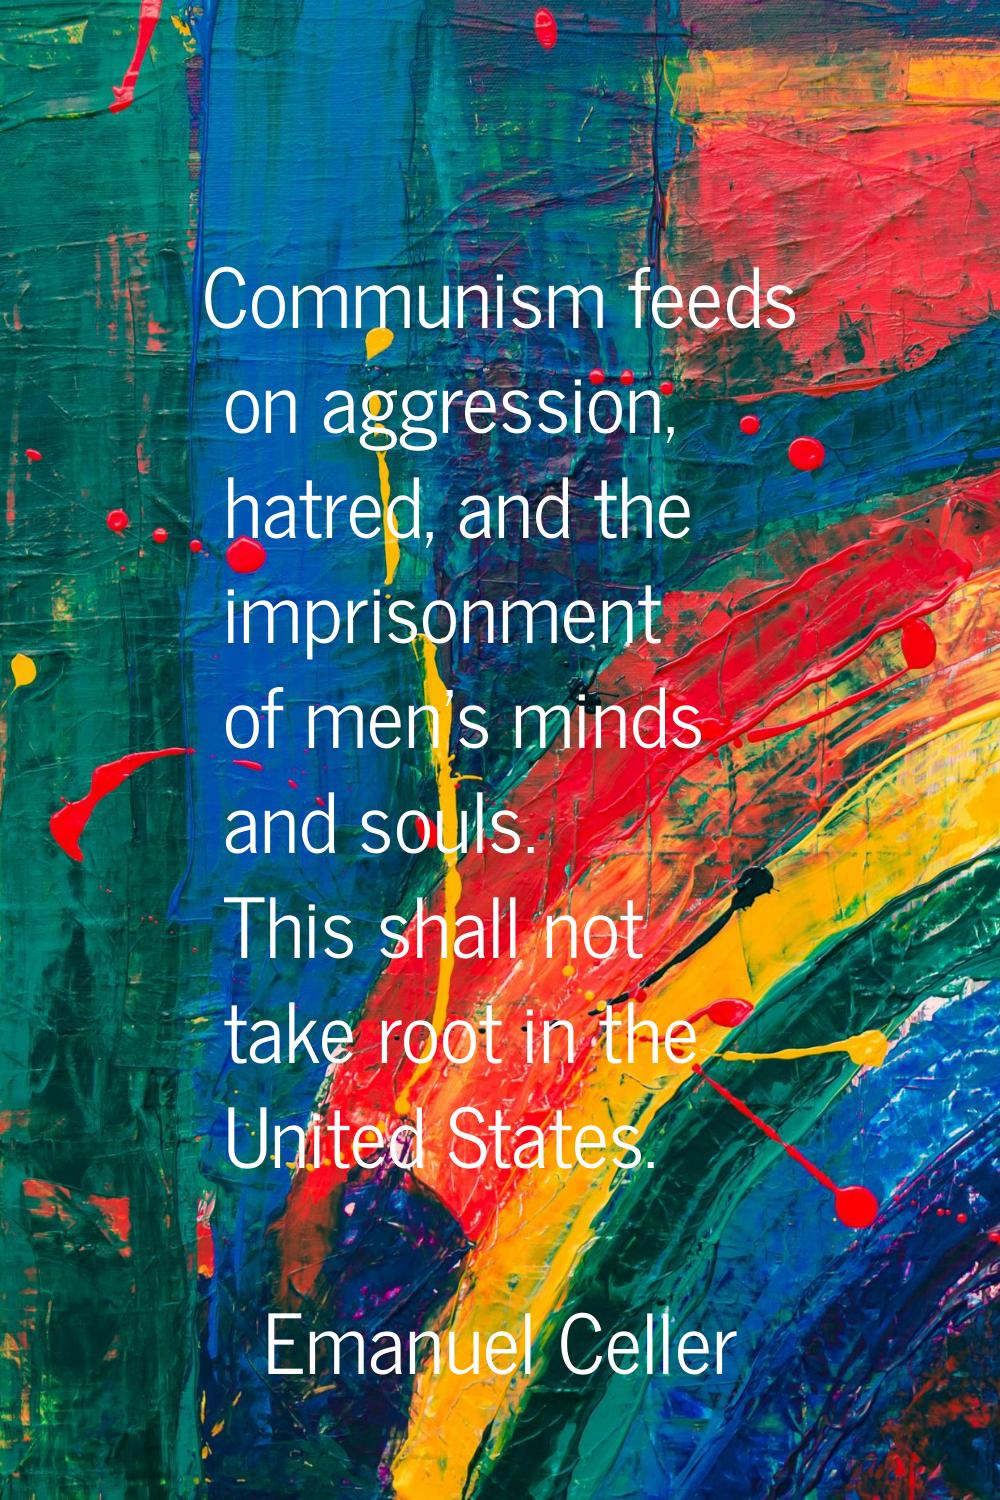 Communism feeds on aggression, hatred, and the imprisonment of men's minds and souls. This shall no